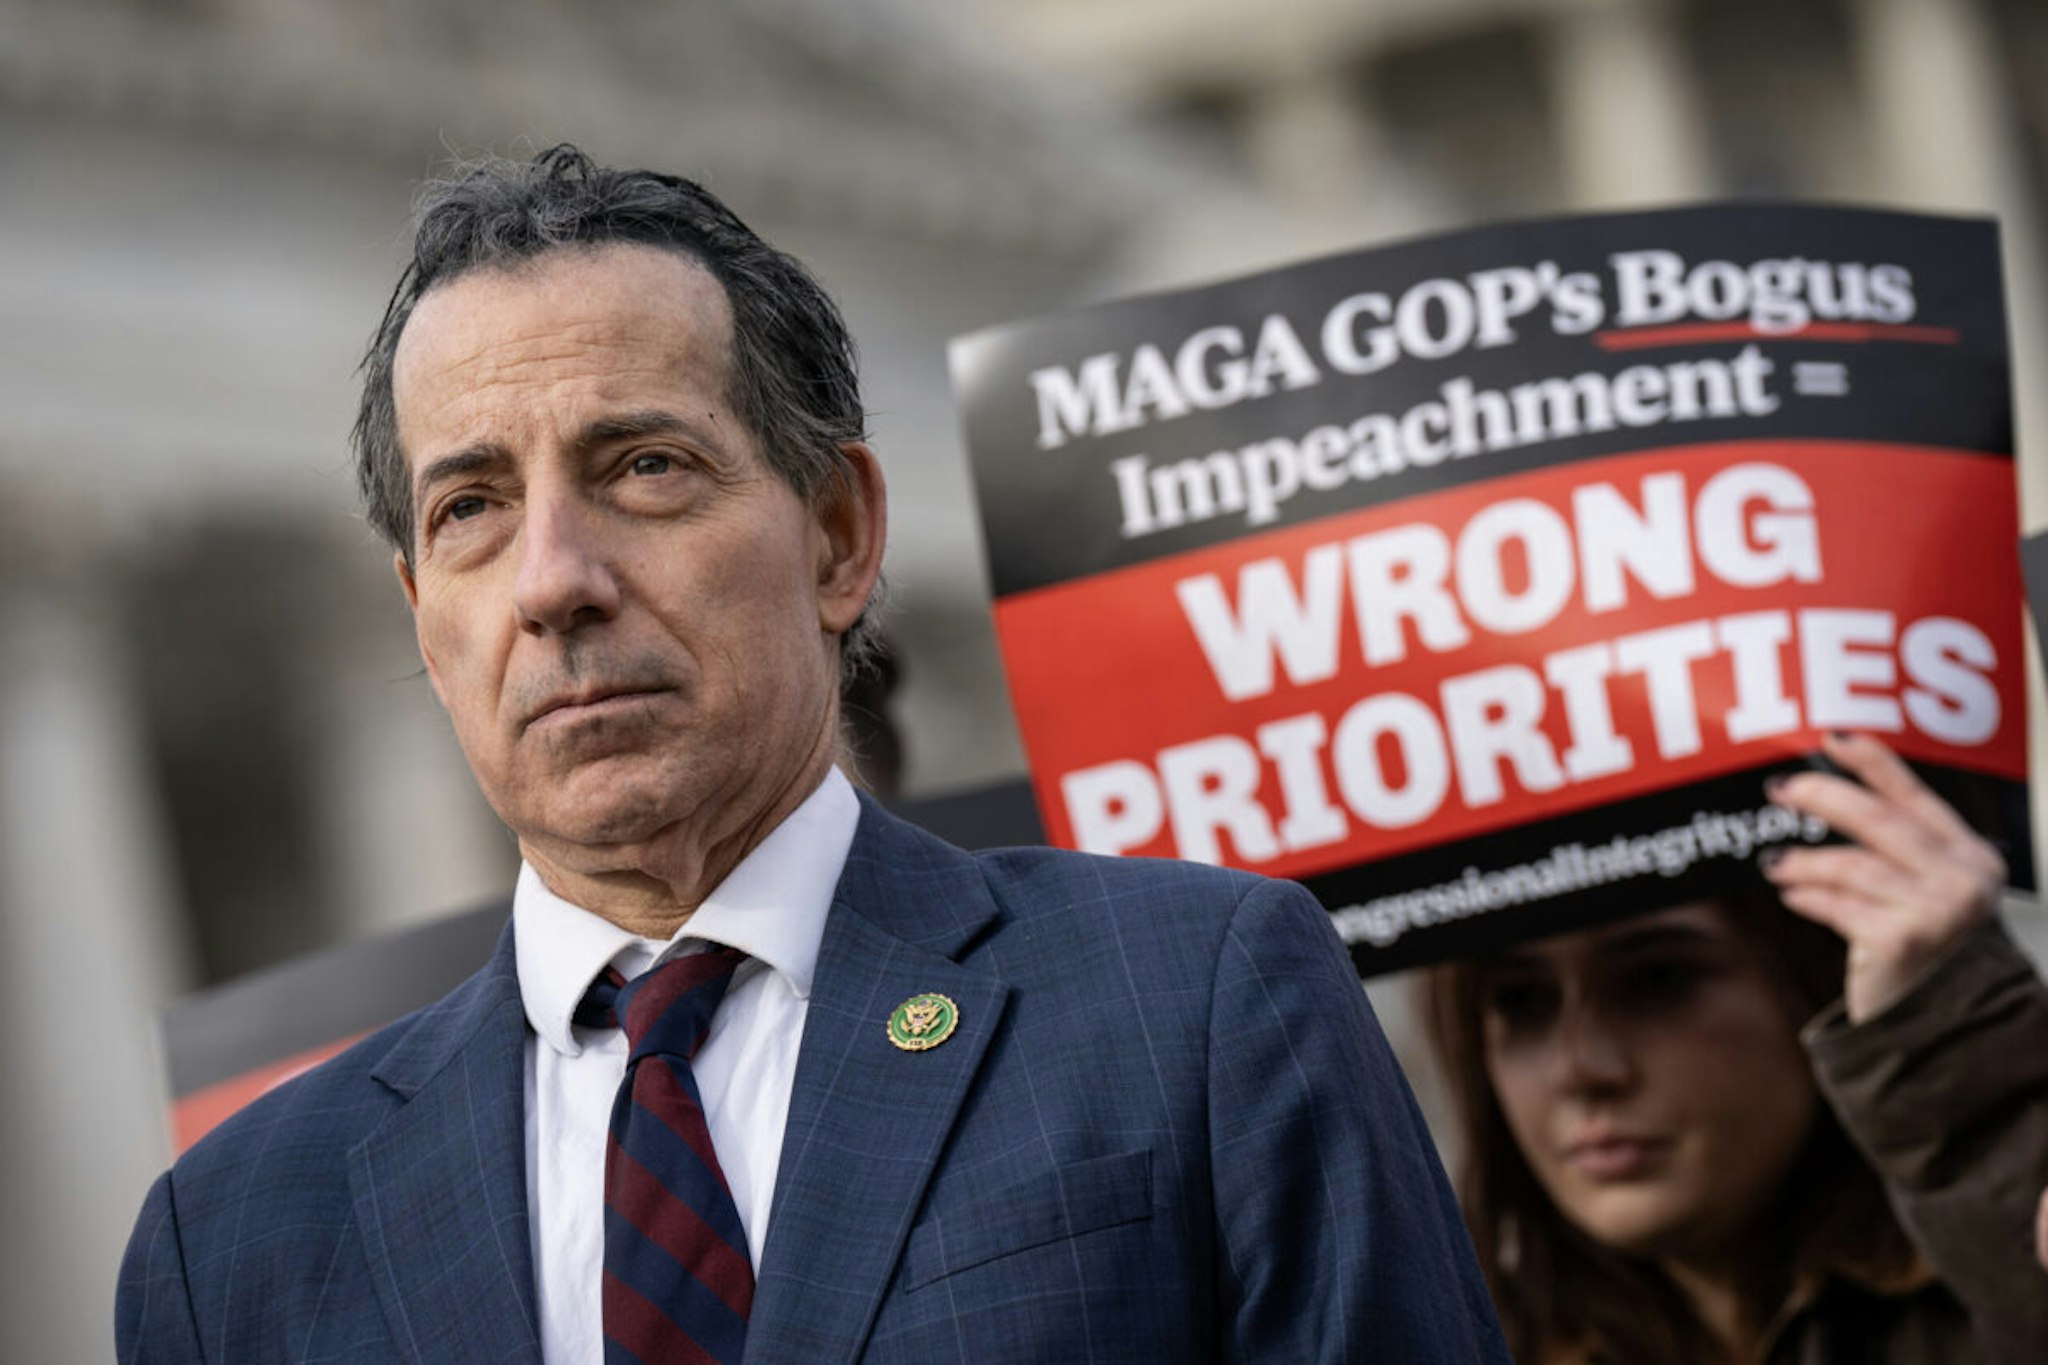 ep. Jamie Raskin (D-MD) attends a news conference about Republican efforts to open an impeachment inquiry into U.S. President Joe Biden, outside the U.S. Capitol on December 13, 2023 in Washington, DC.